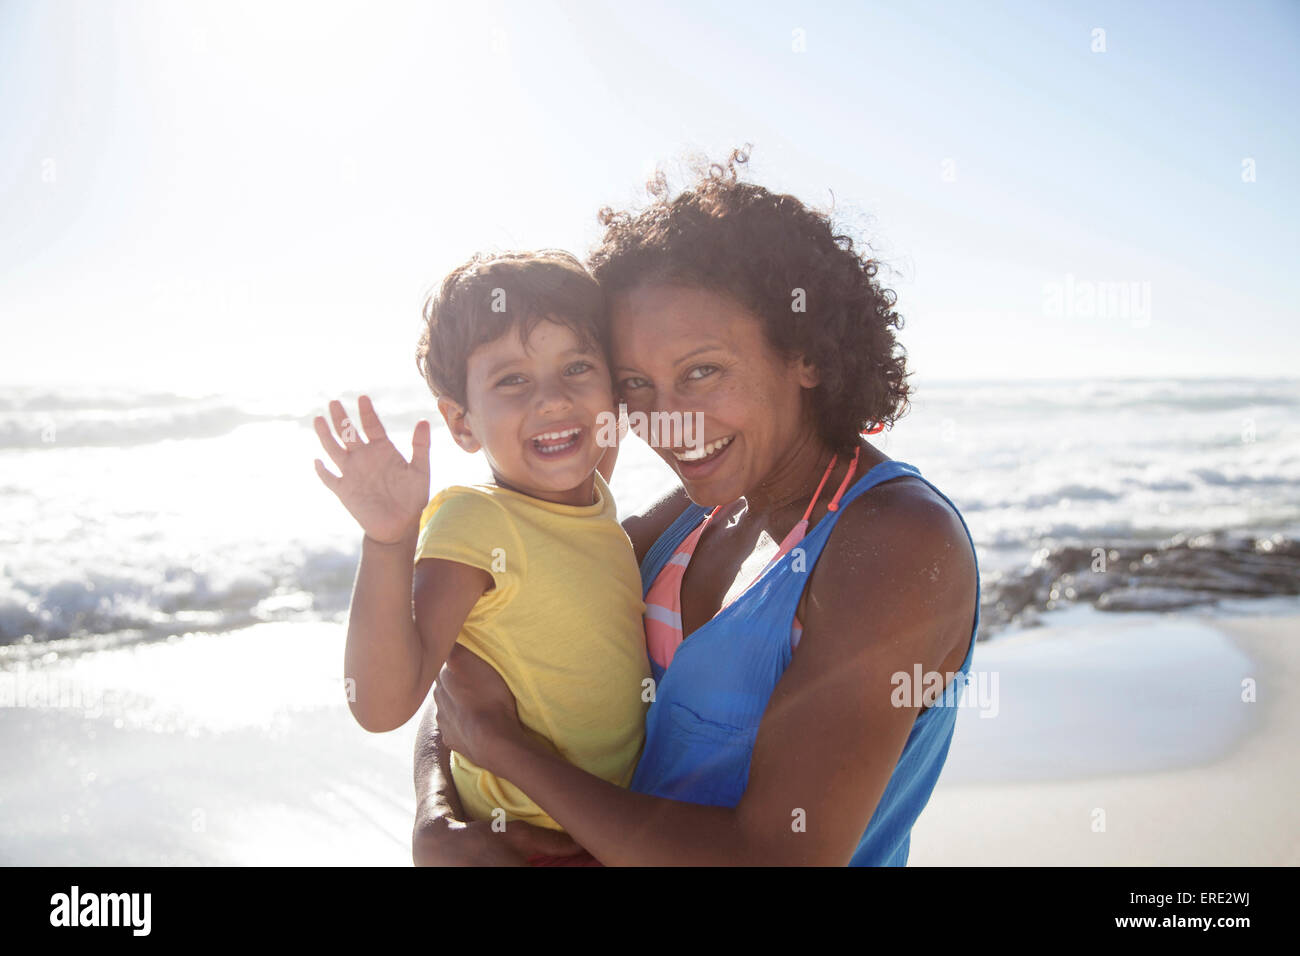 Mixed race mother and daughter waving on beach Stock Photo